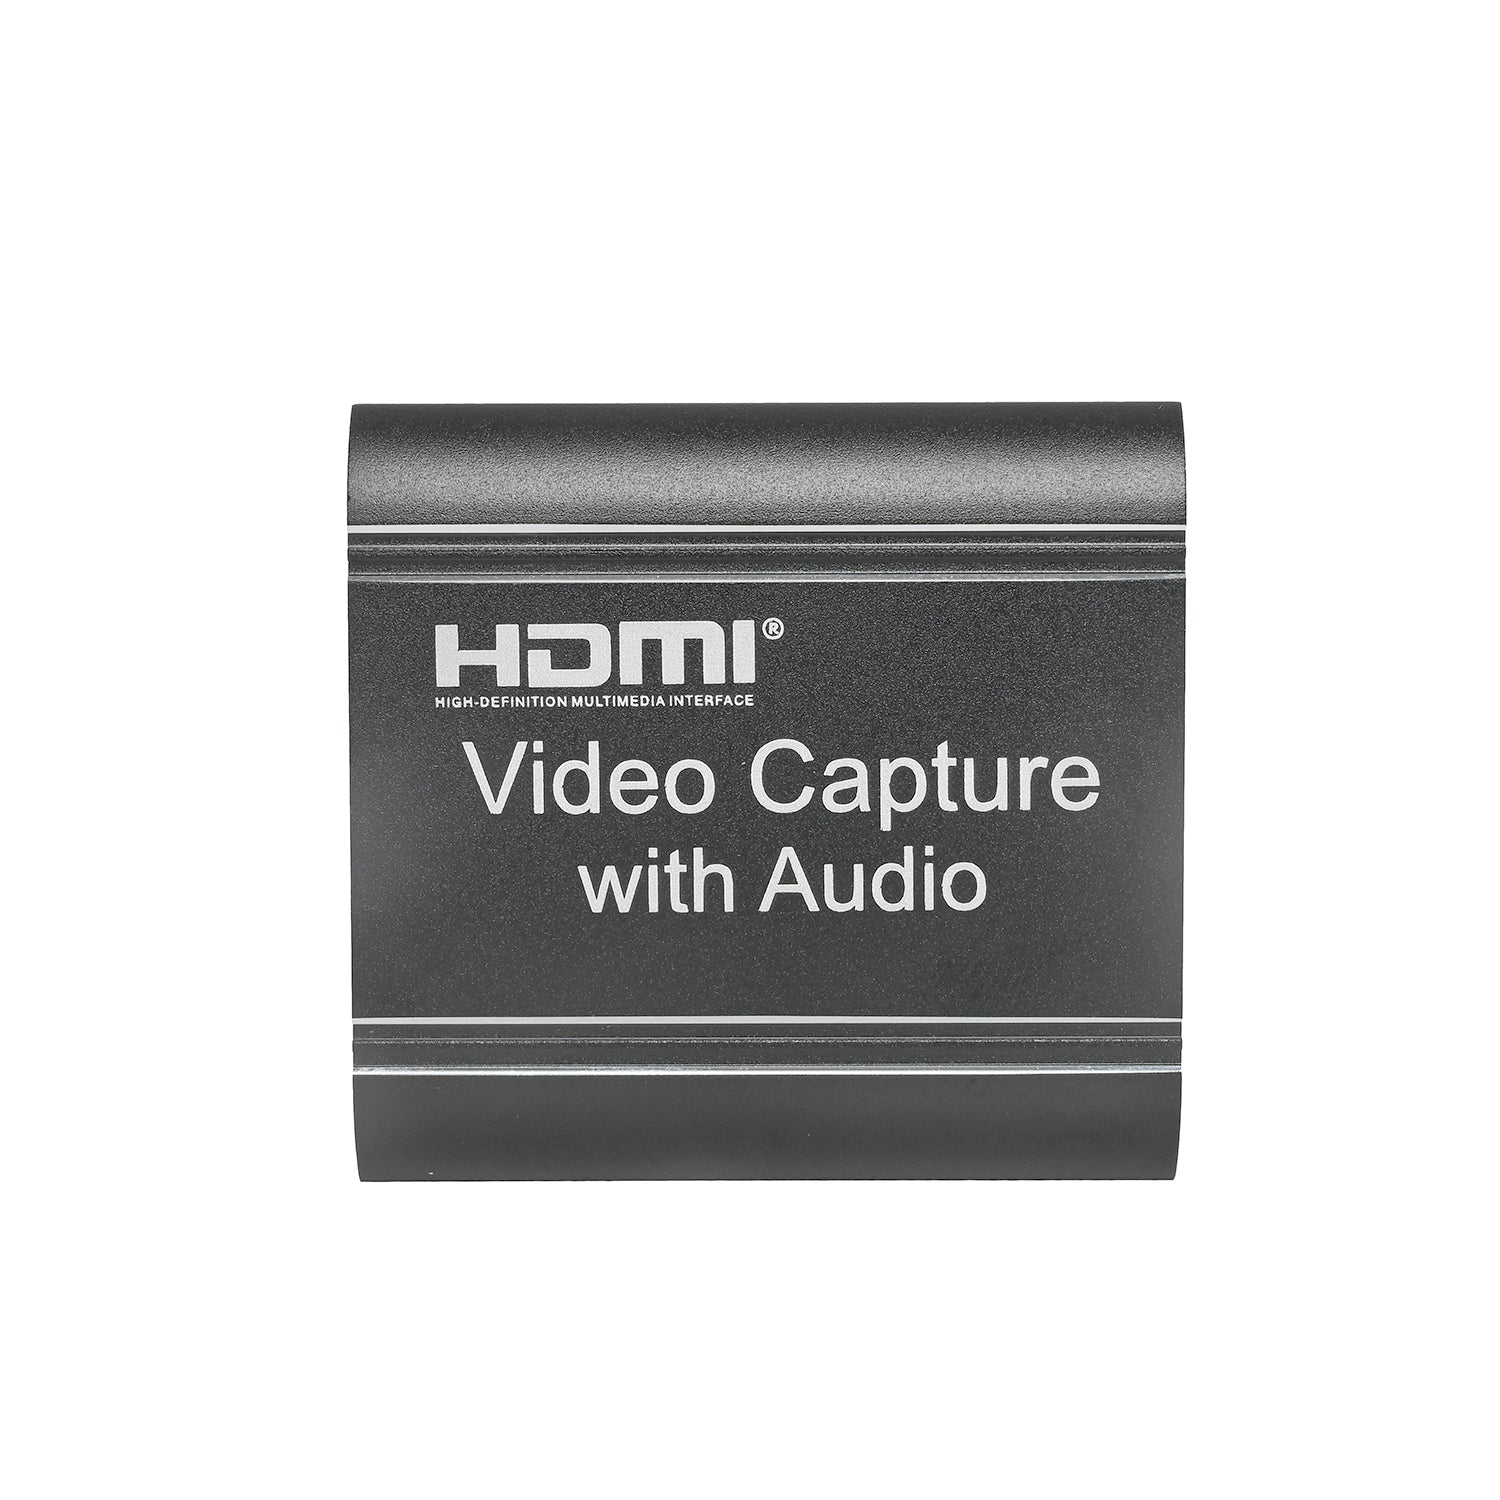 HDMI Video Capture with Audio USB 3.0